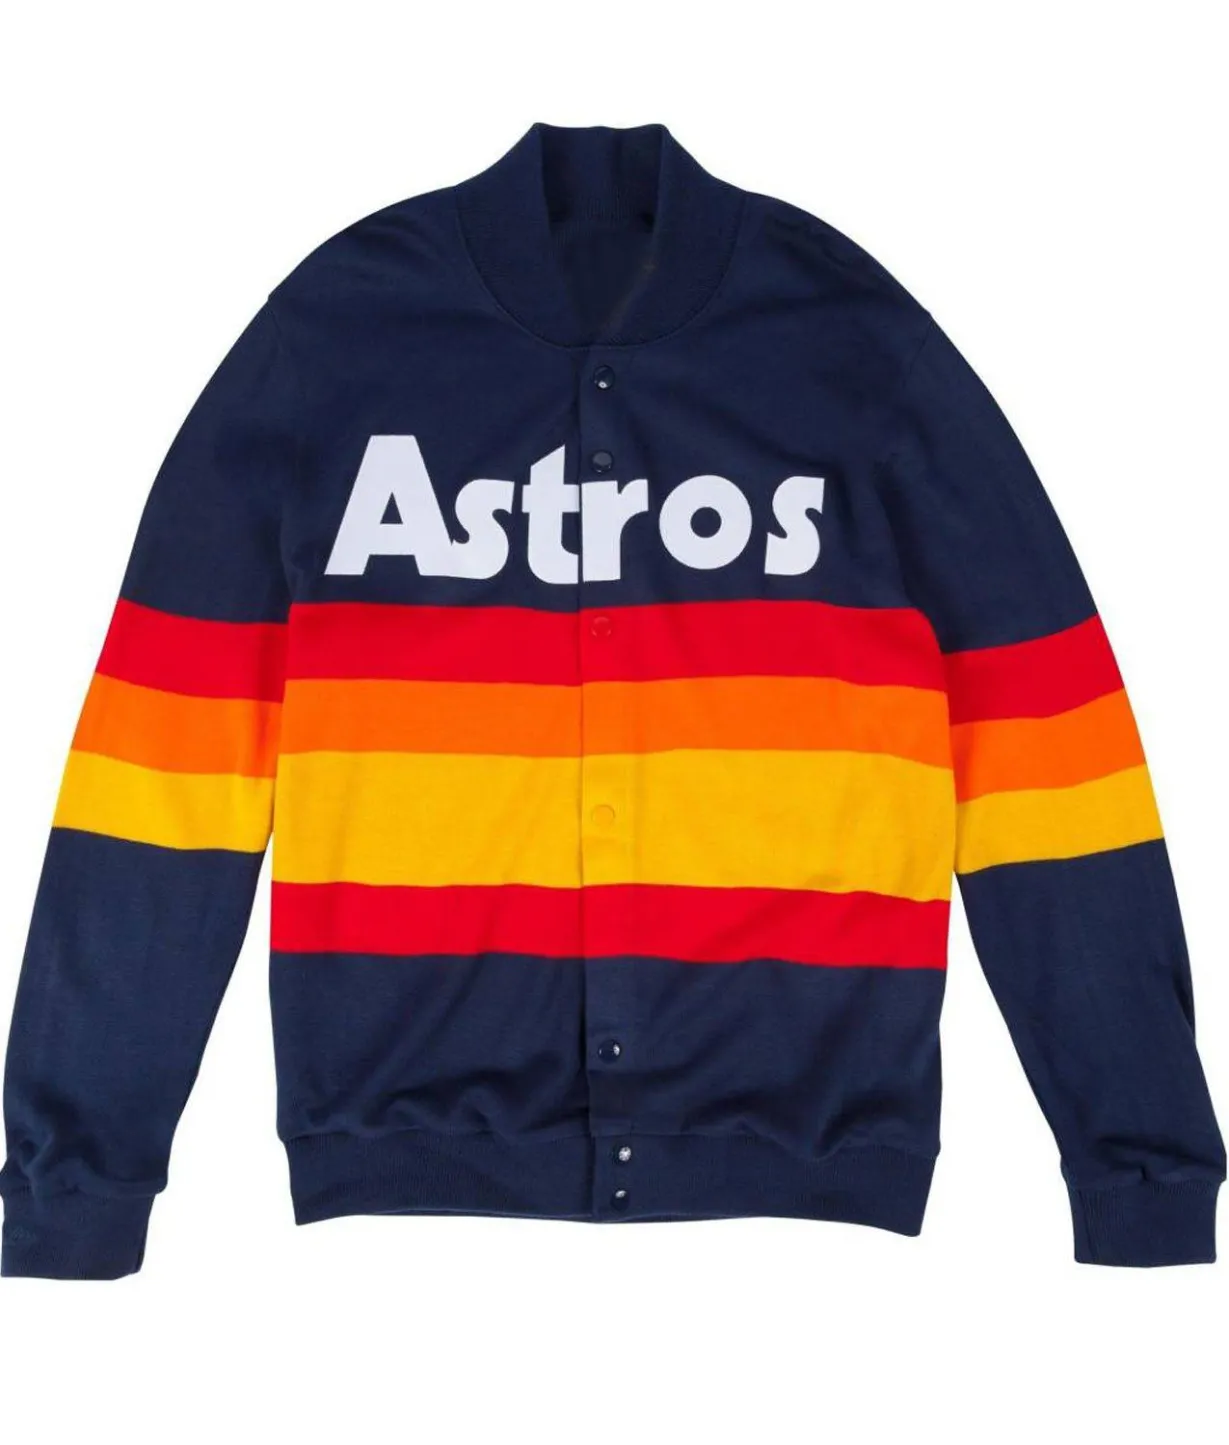 Houston Astros Navy Blue with Tricolor Jacket